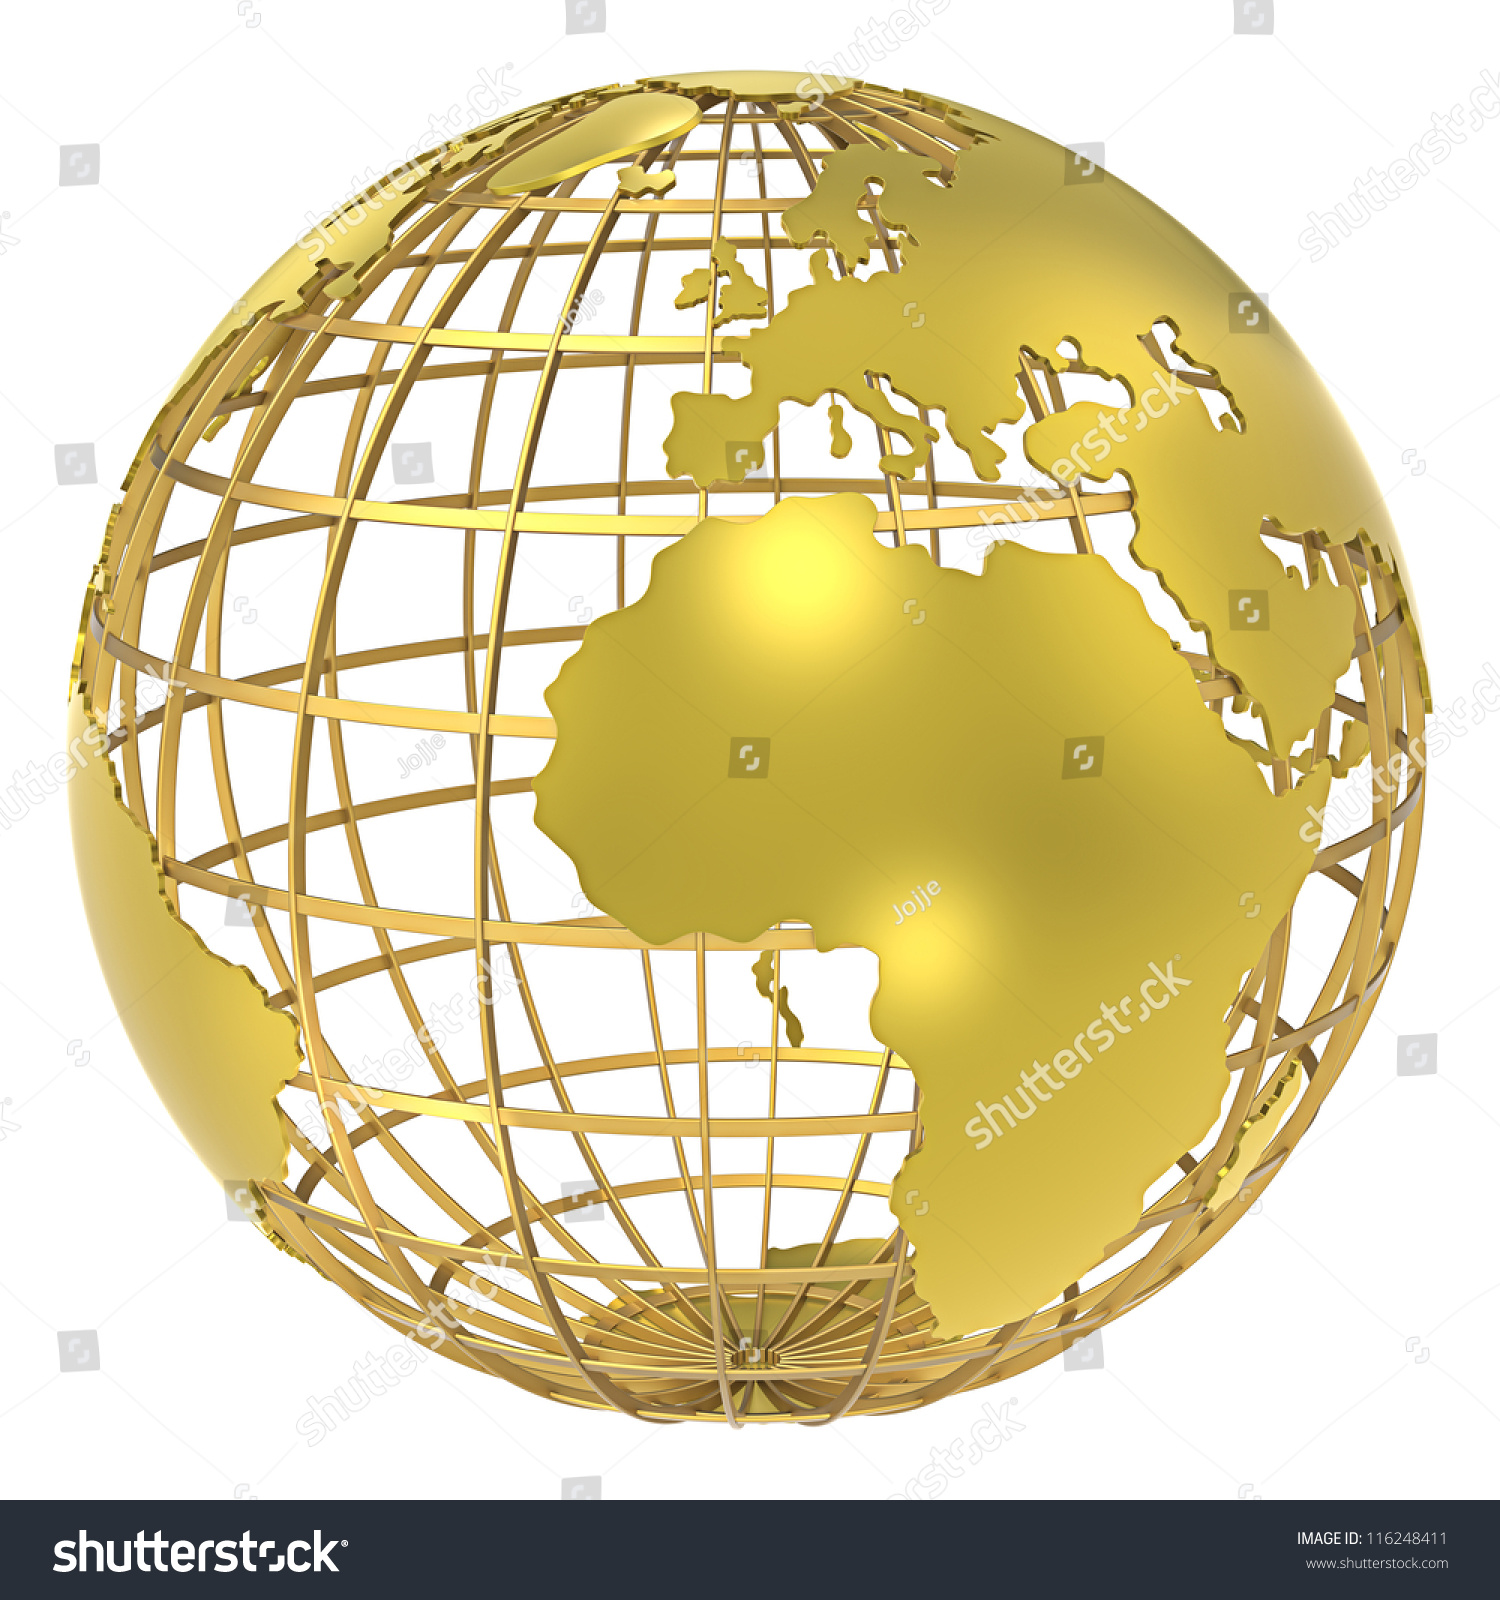 The Earth, Frame Structure Of Gold. Isolated. Stock Photo 116248411 ...